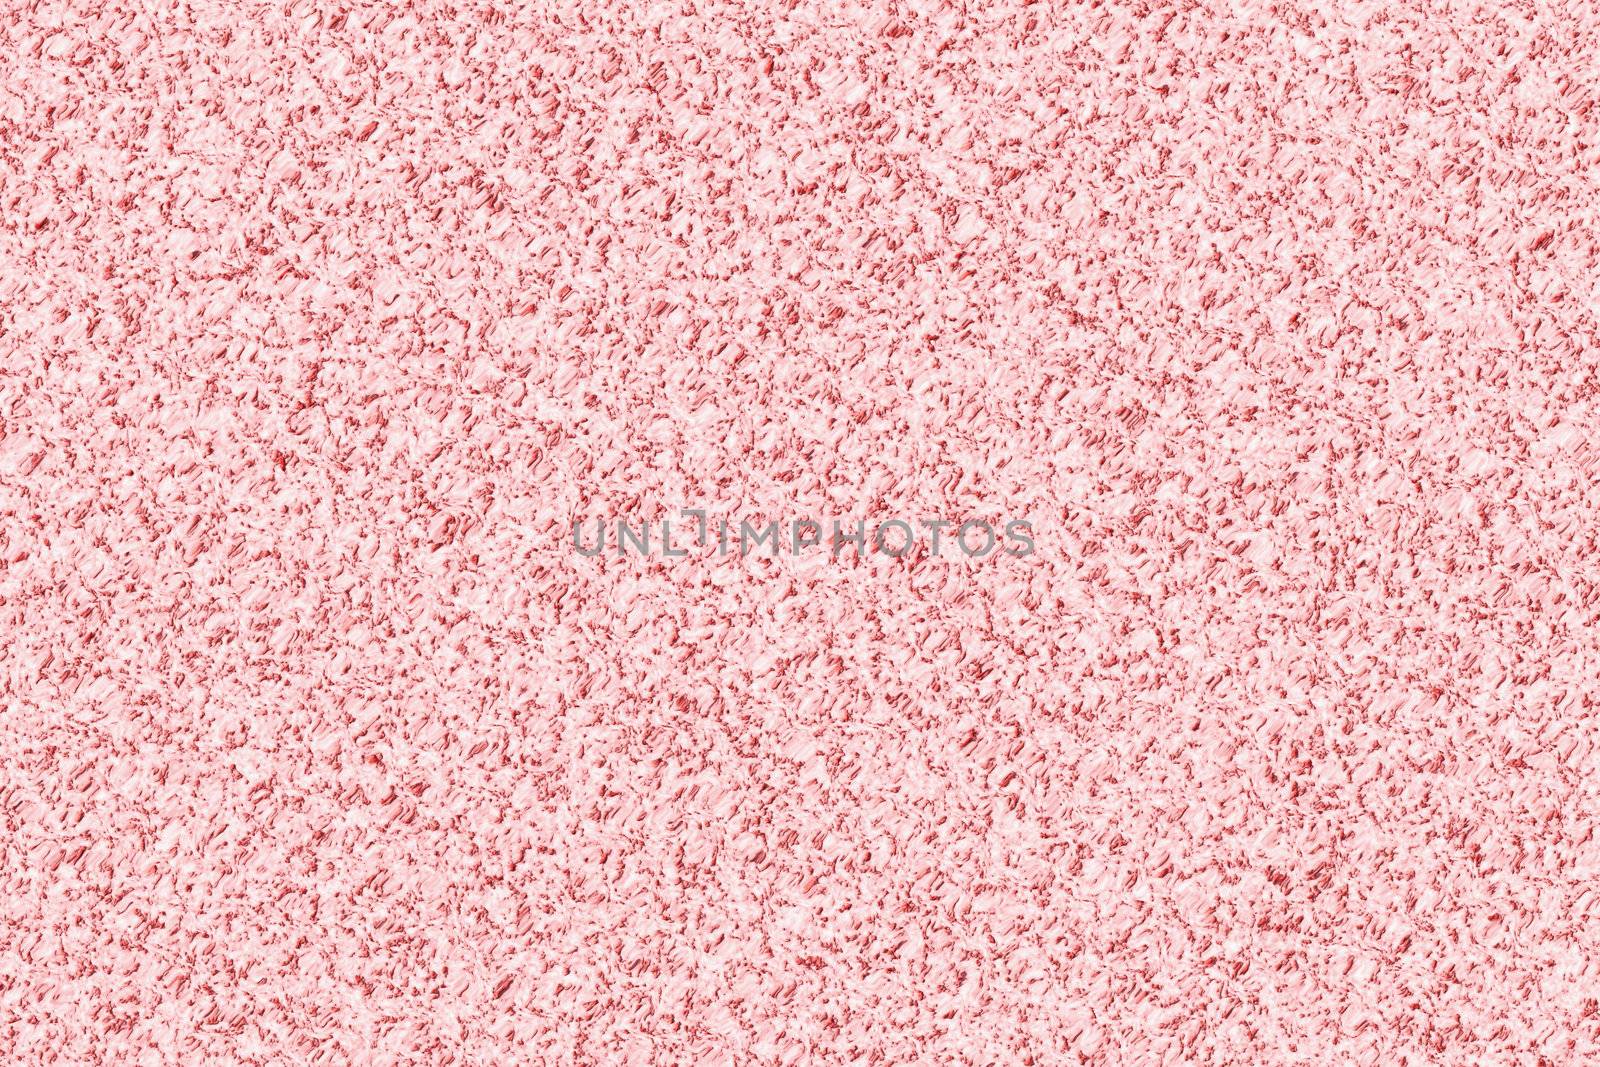 Texture pink stone background